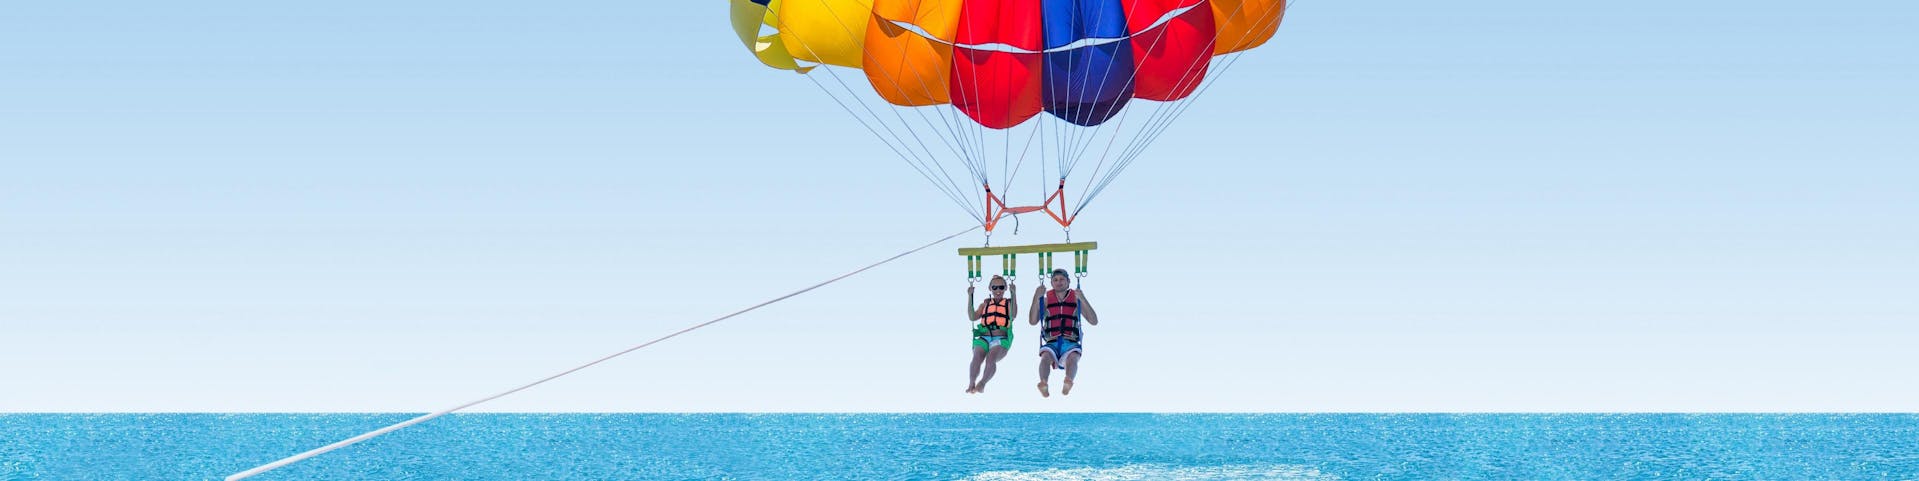 Friends are parasailing in the blue sky over the ocean